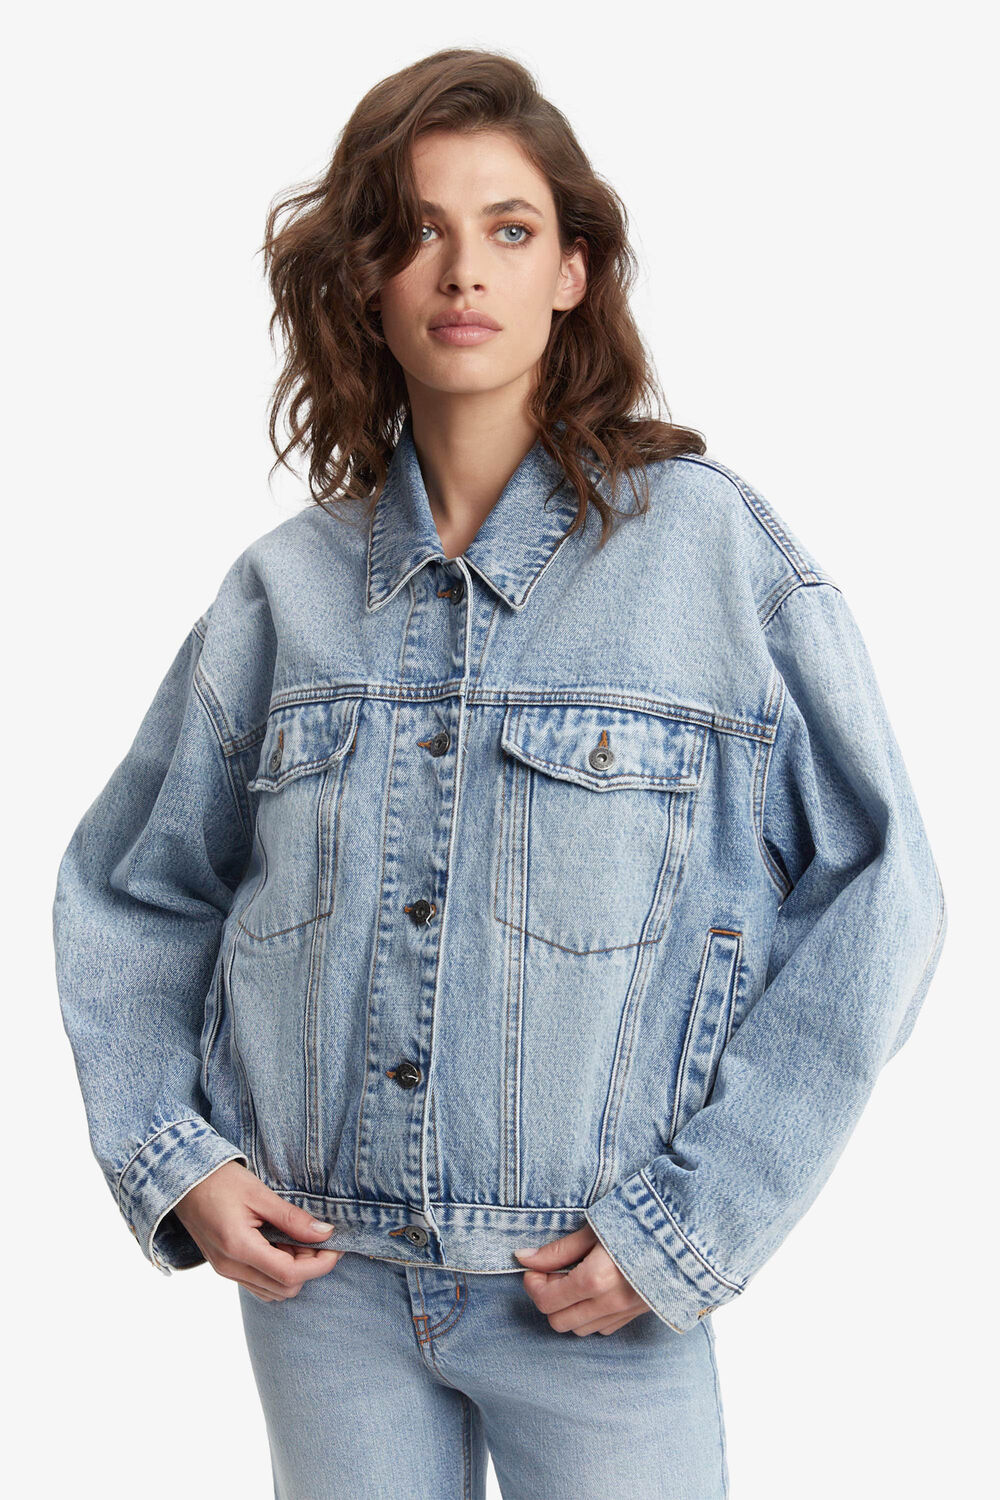 RELAXED DENIM JACKET in colour CITADEL